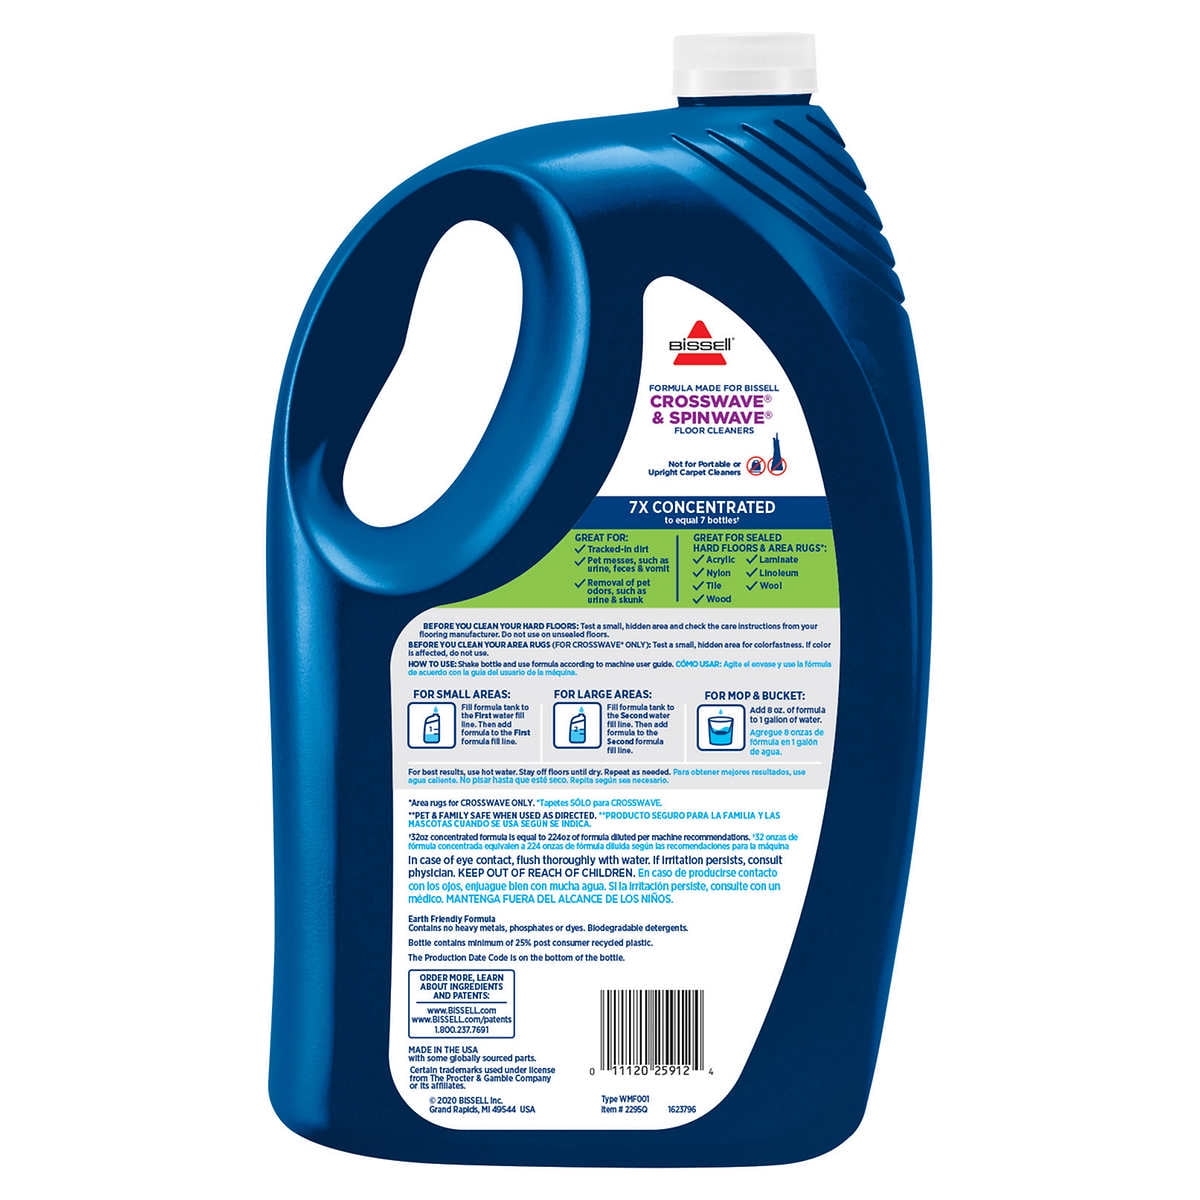 Bissell Pet Multi-Surface Febreze Freshness for Crosswave and Spinwave (64  oz), 22951, 64 Ounce, 64 Fl Oz